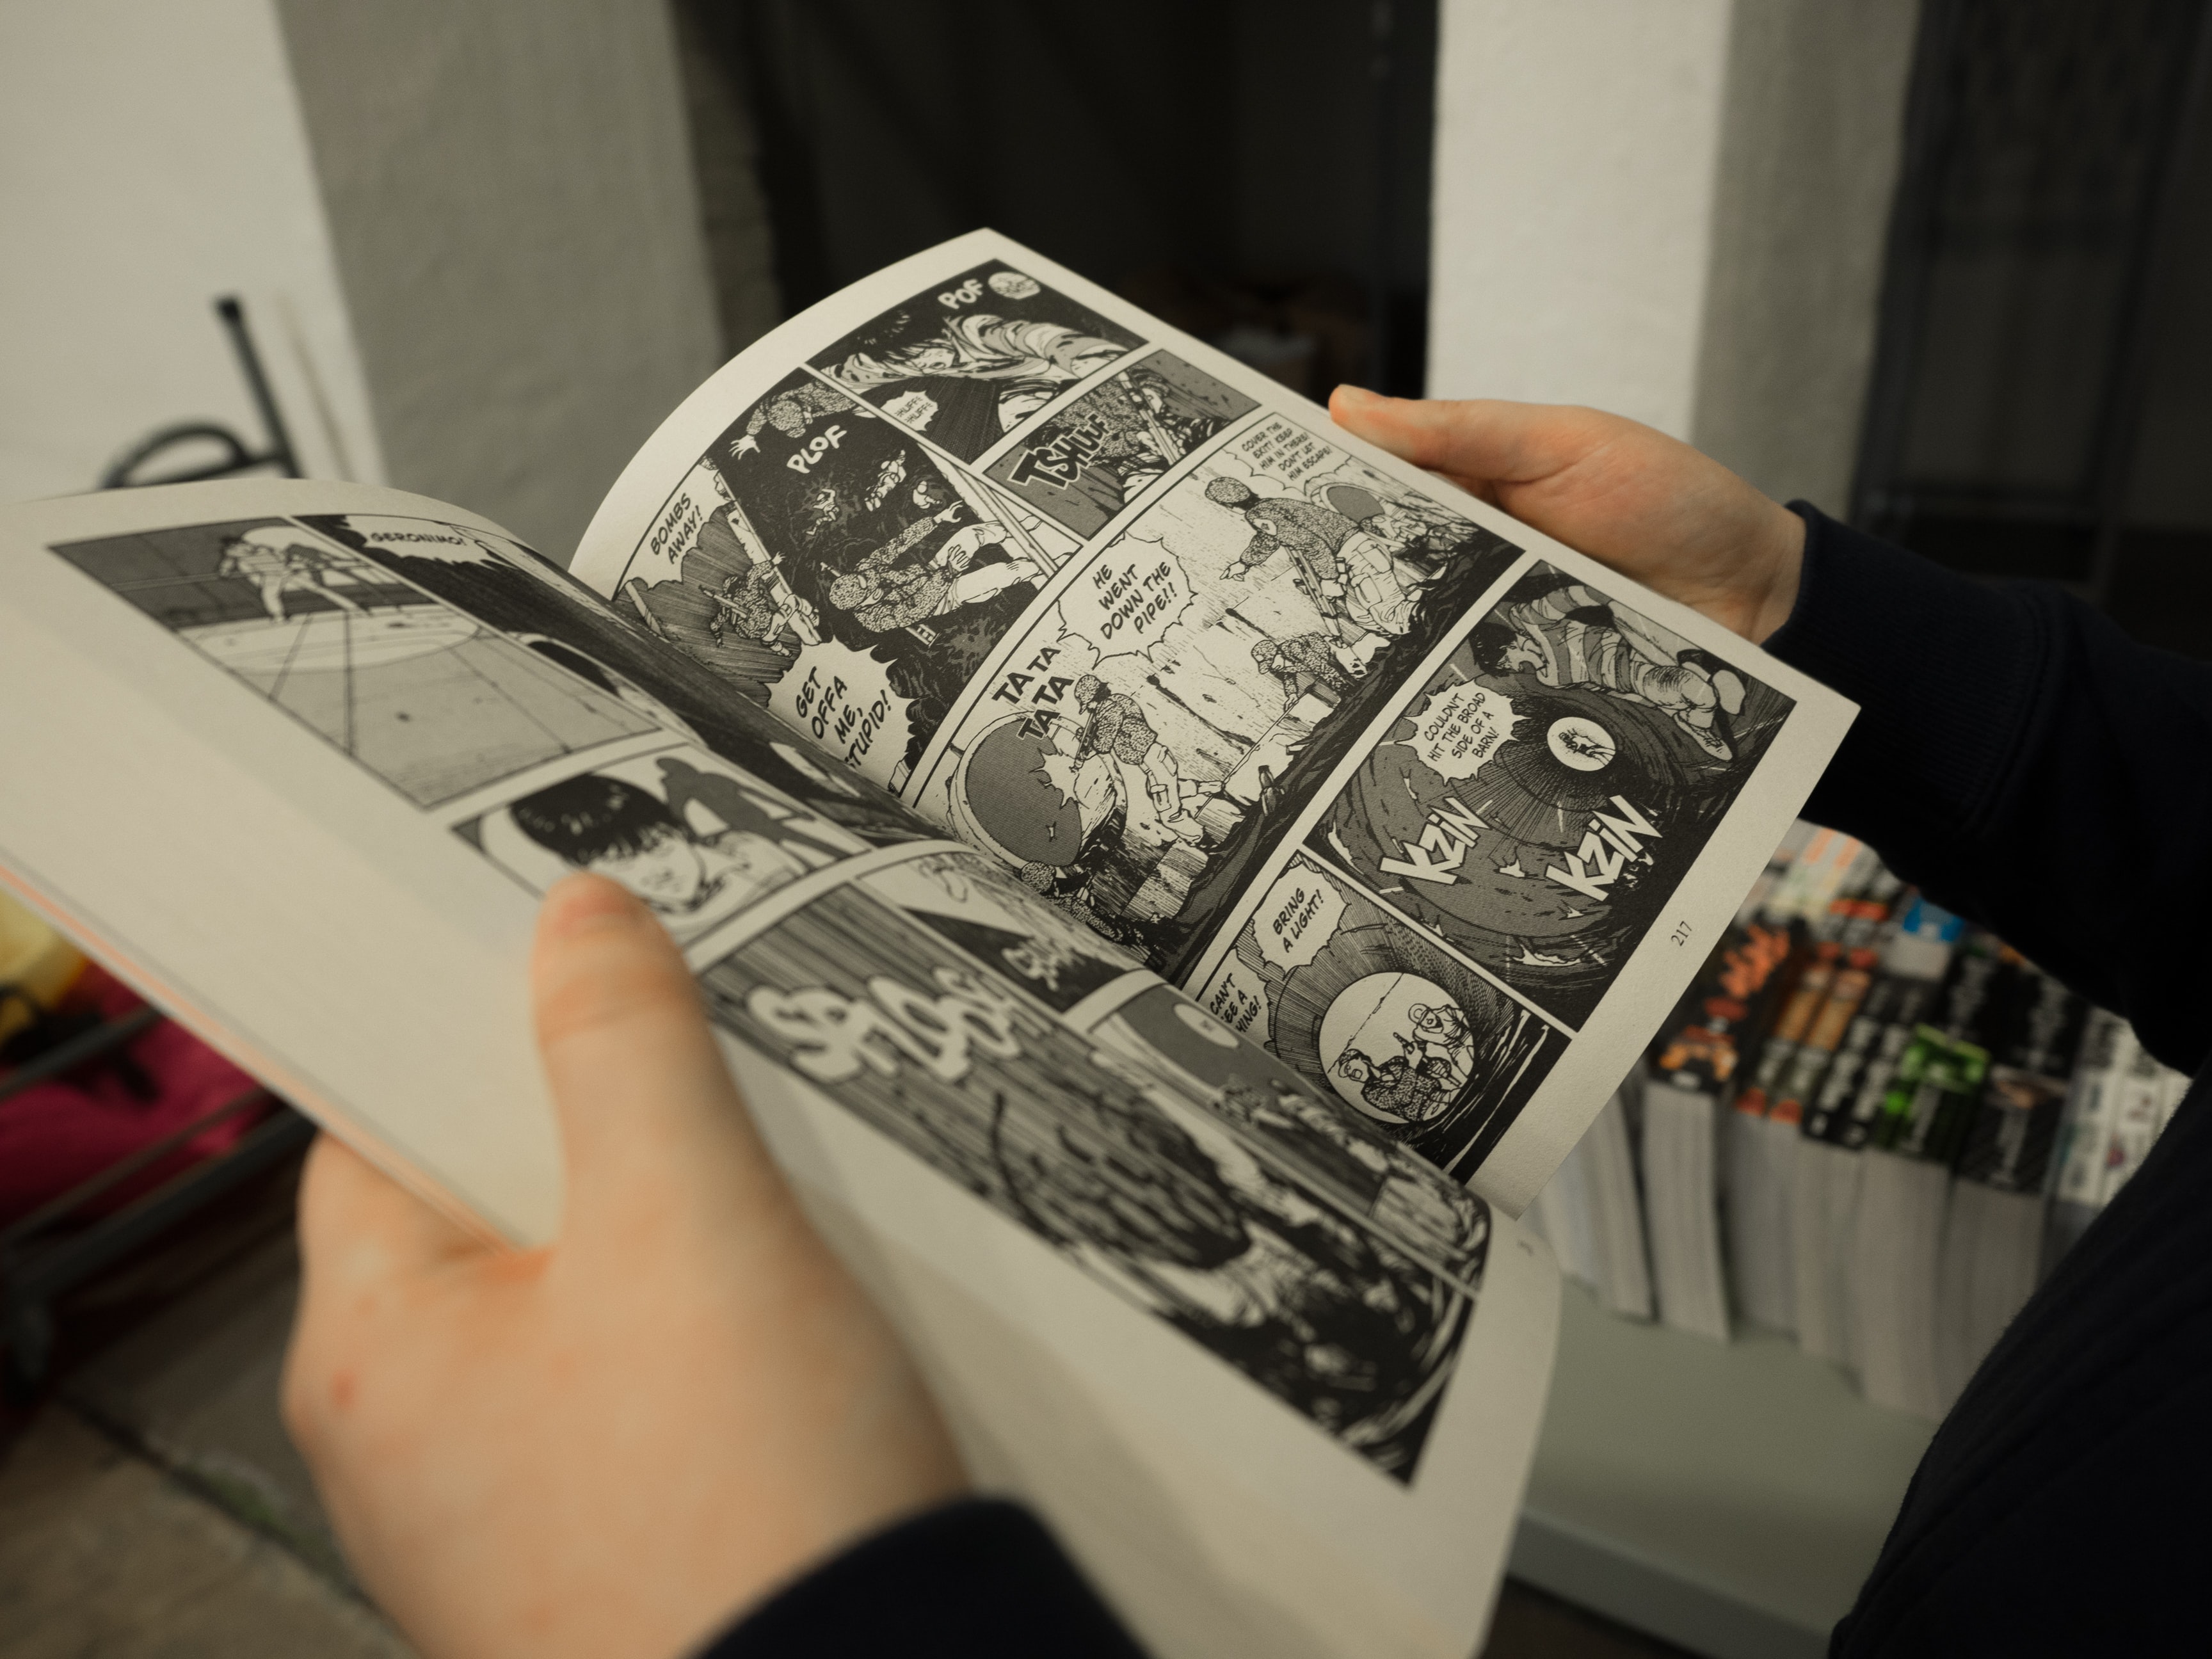 Open comic book with black and white illustrations